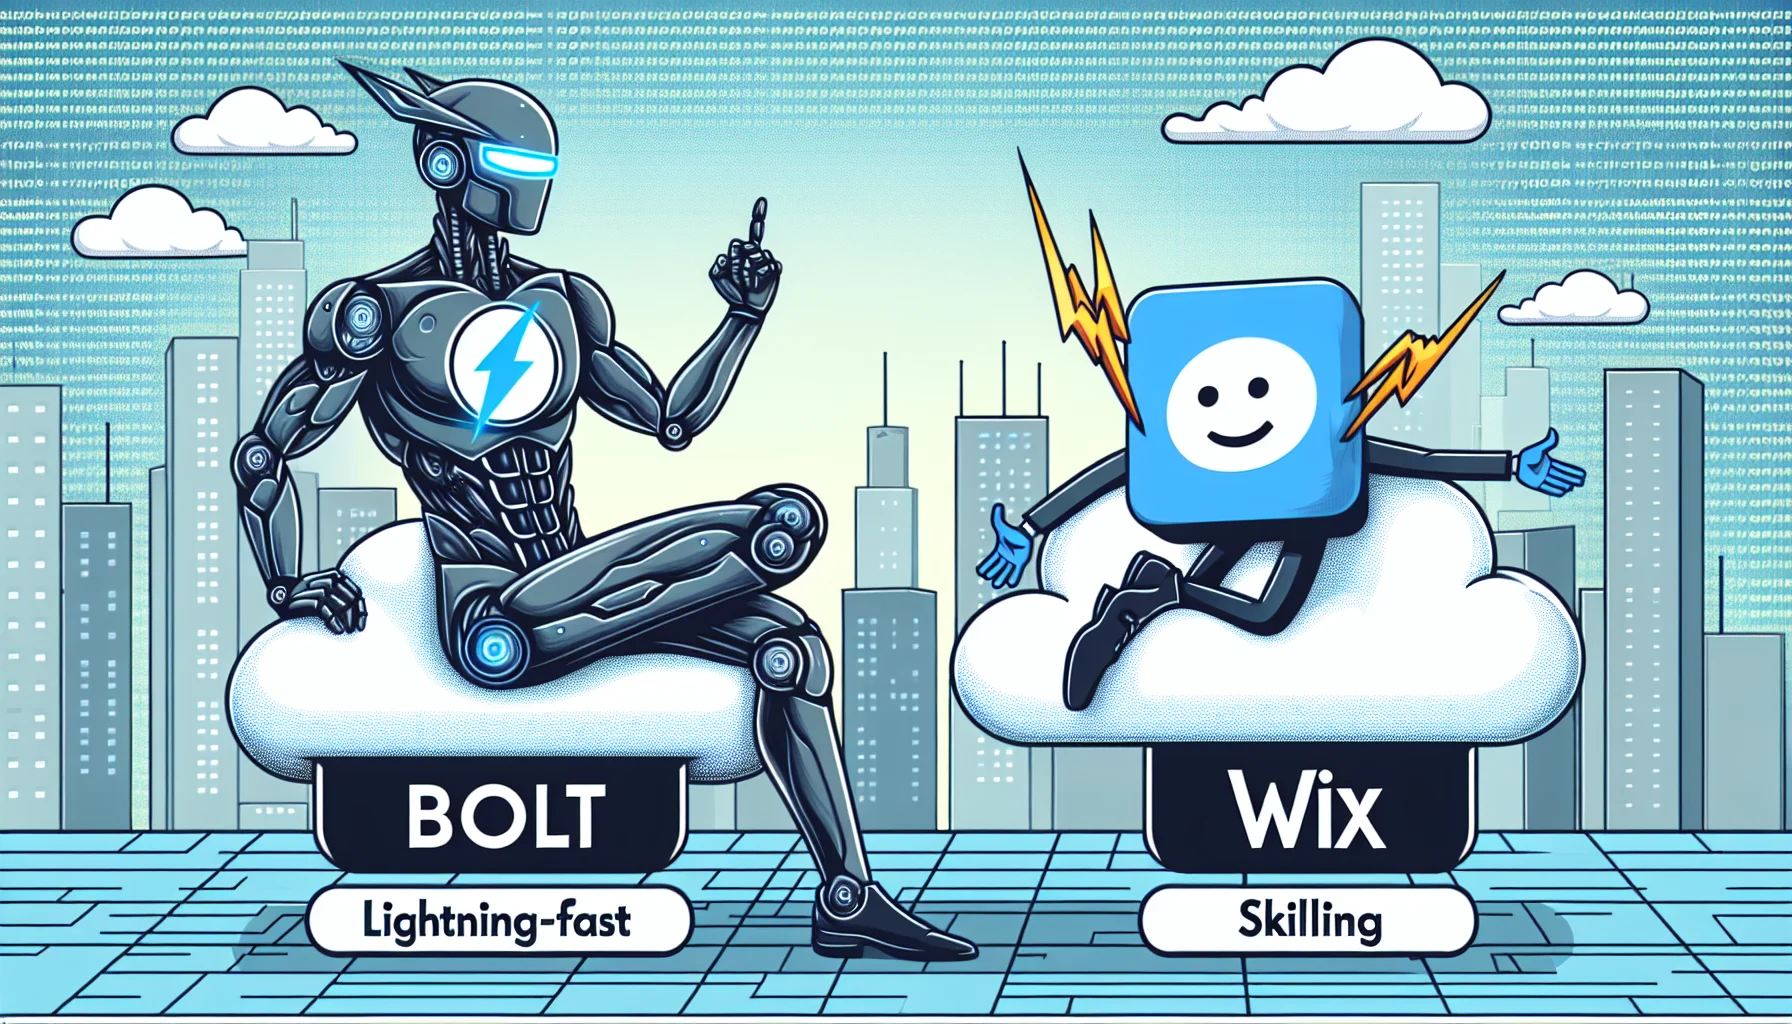 Create a humorous scene depicting the friendly rivalry between two abstract web hosting platforms. The left side presents a lightning-fast, efficient, and skilled platform, demonstrated by a sleek, futuristic robot with a 'bolt' logo emblem. This represents 'Editor X'. On the right side, there is the competitor, relaxing on a cloud which stands for the platform 'Wix', depicted as a charismatic and charming, yet slightly clumsy, robot with a 'W' logo. The scene is set in the digital realm, which may appear as a city skyline made of code, to better signify the web hosting theme.